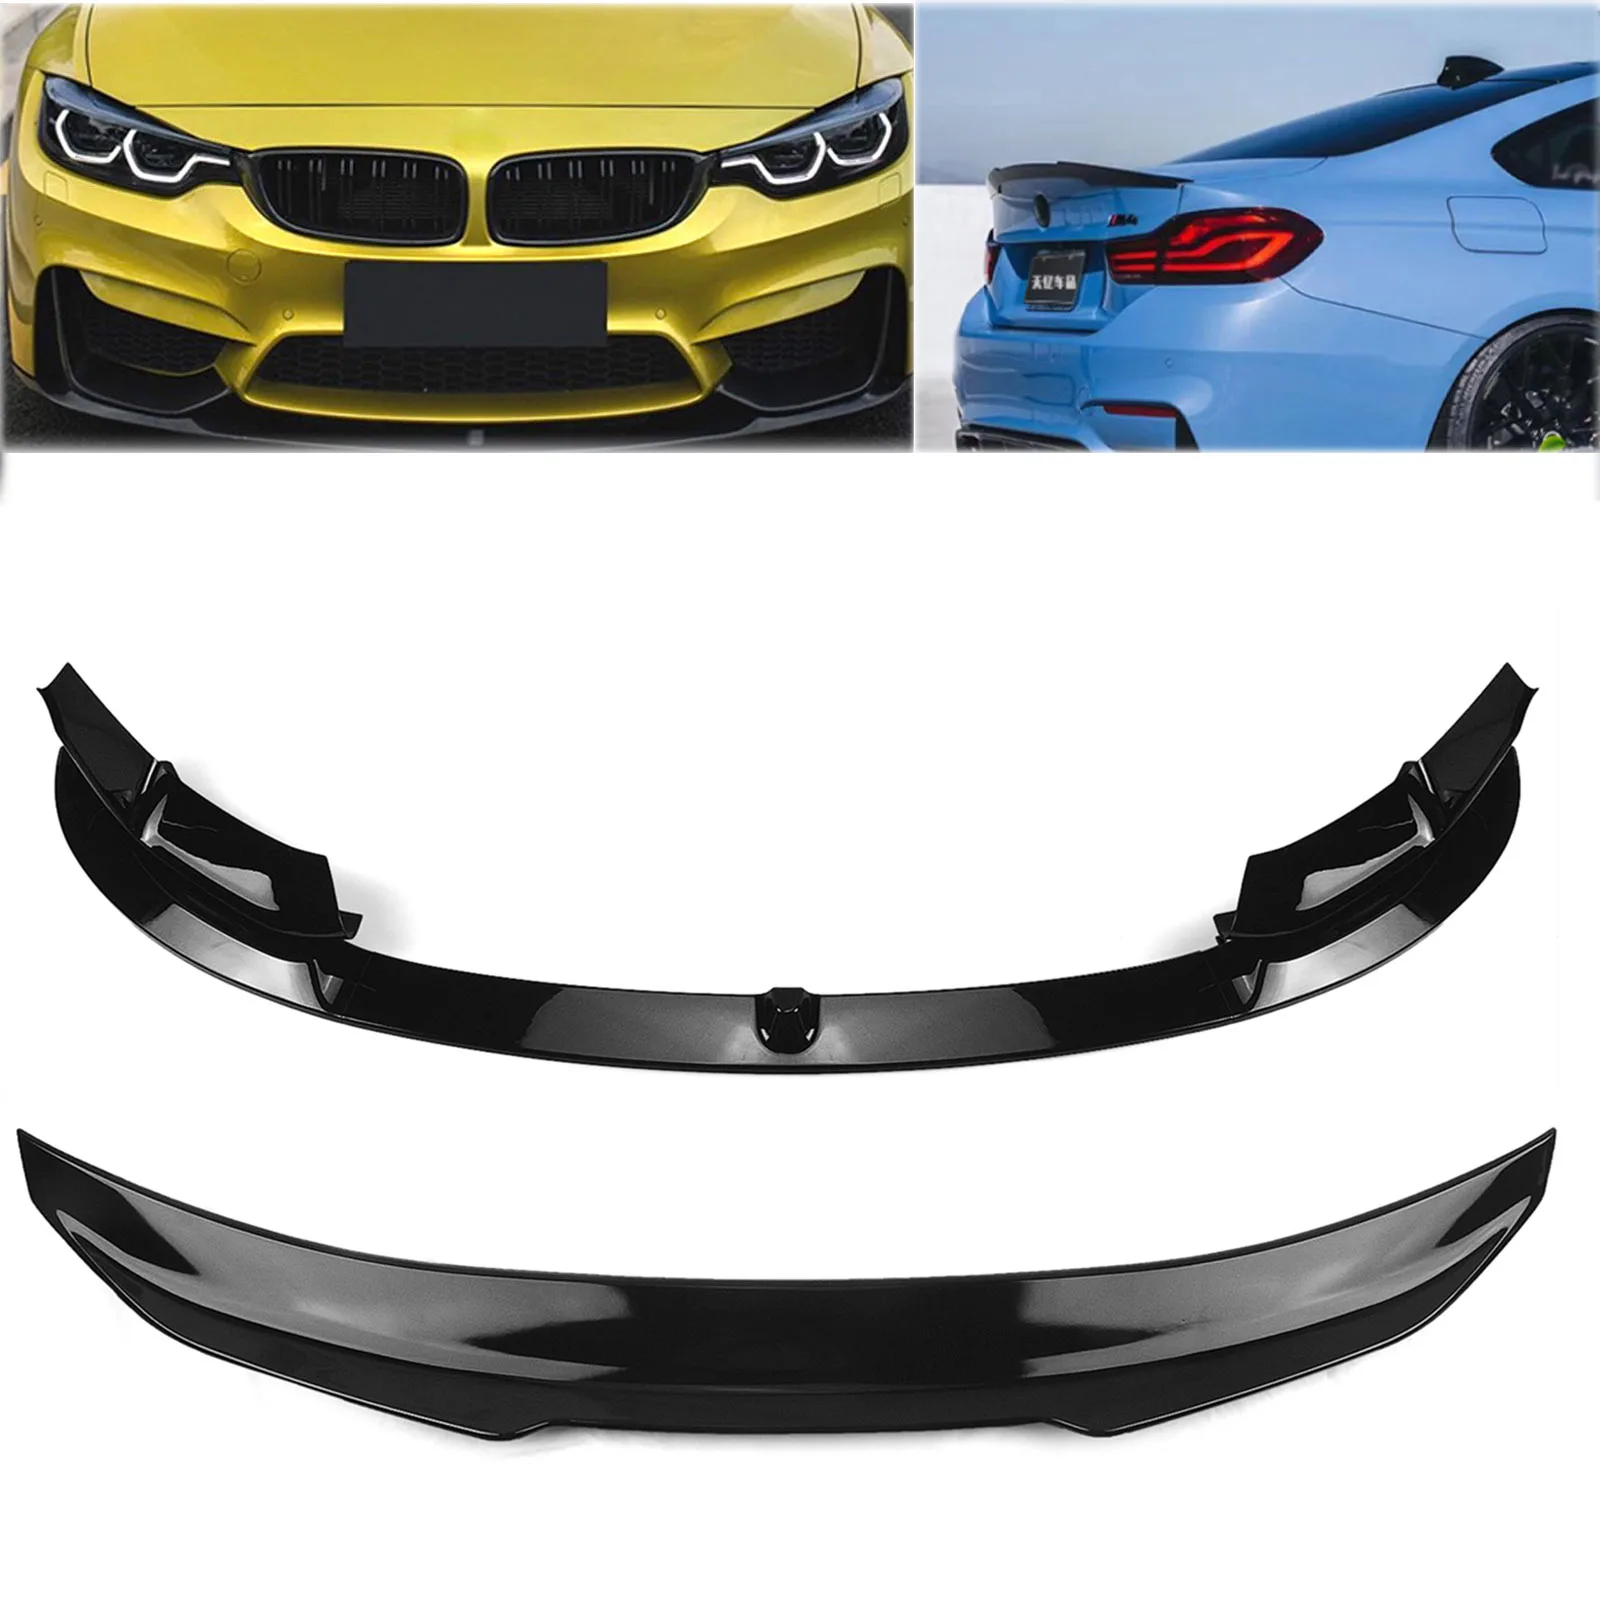 

For 2015-2020 BMW F82 M4 Coupe 2 Door Only PSM Rear Trunk Spoiler Wing+Front Bumper Splitter Lip Gloss Black/Carbon Fiber Look